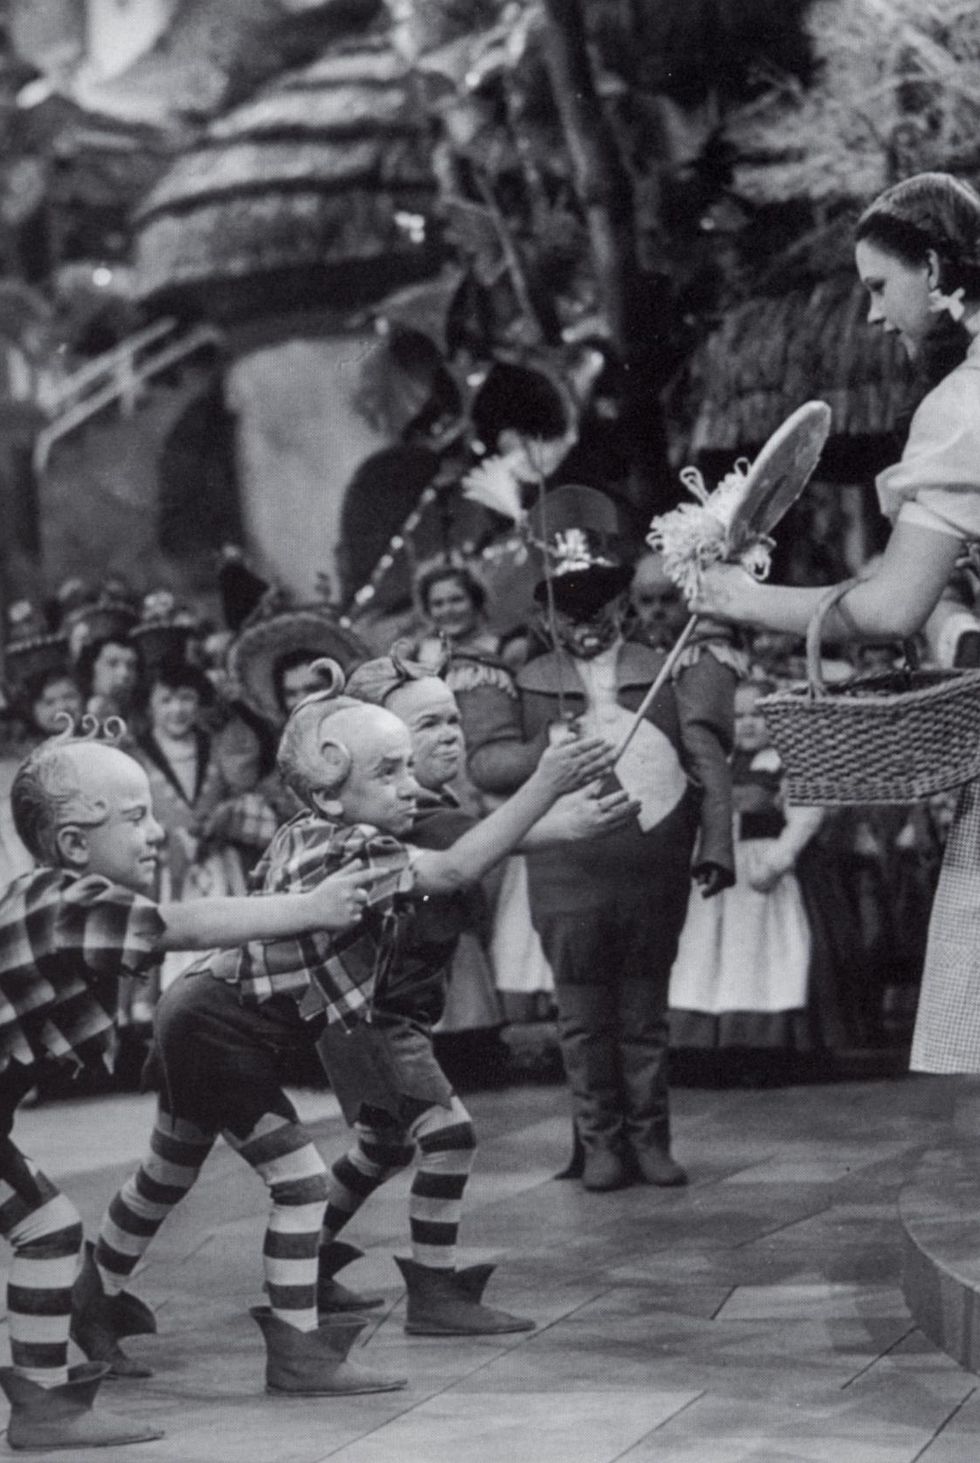 Jerry Maren, playing a Lollipop Guild Member, presents Judy Garland with a lollipop in the film 'The Wizard of Oz.'